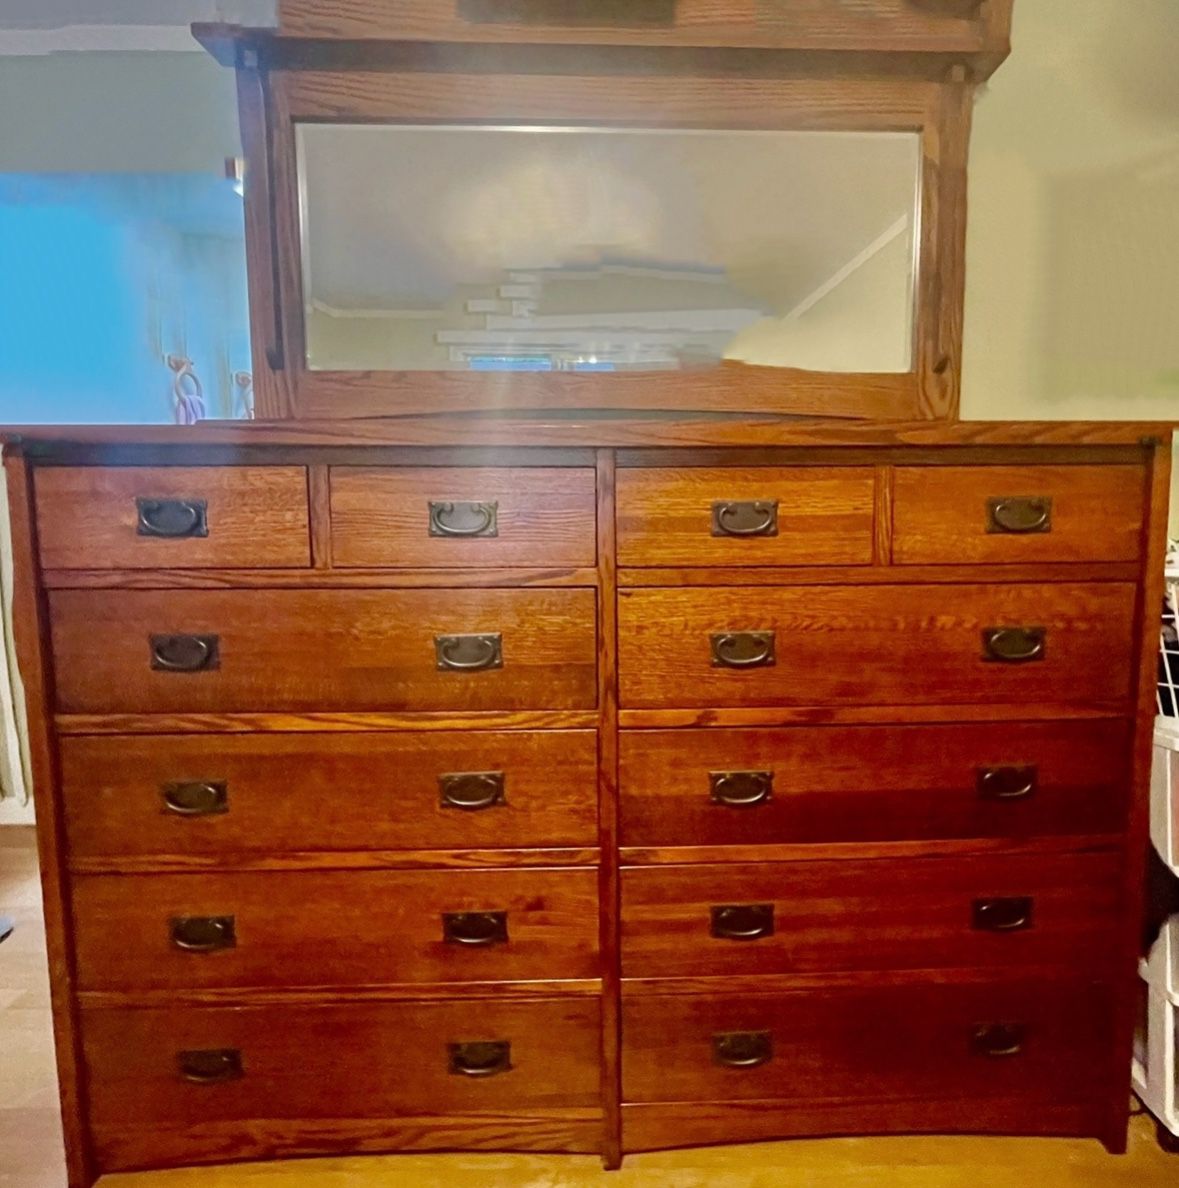 ***PENDING Pick Up*** Mule Chest Dresser & Mirror Mission Style